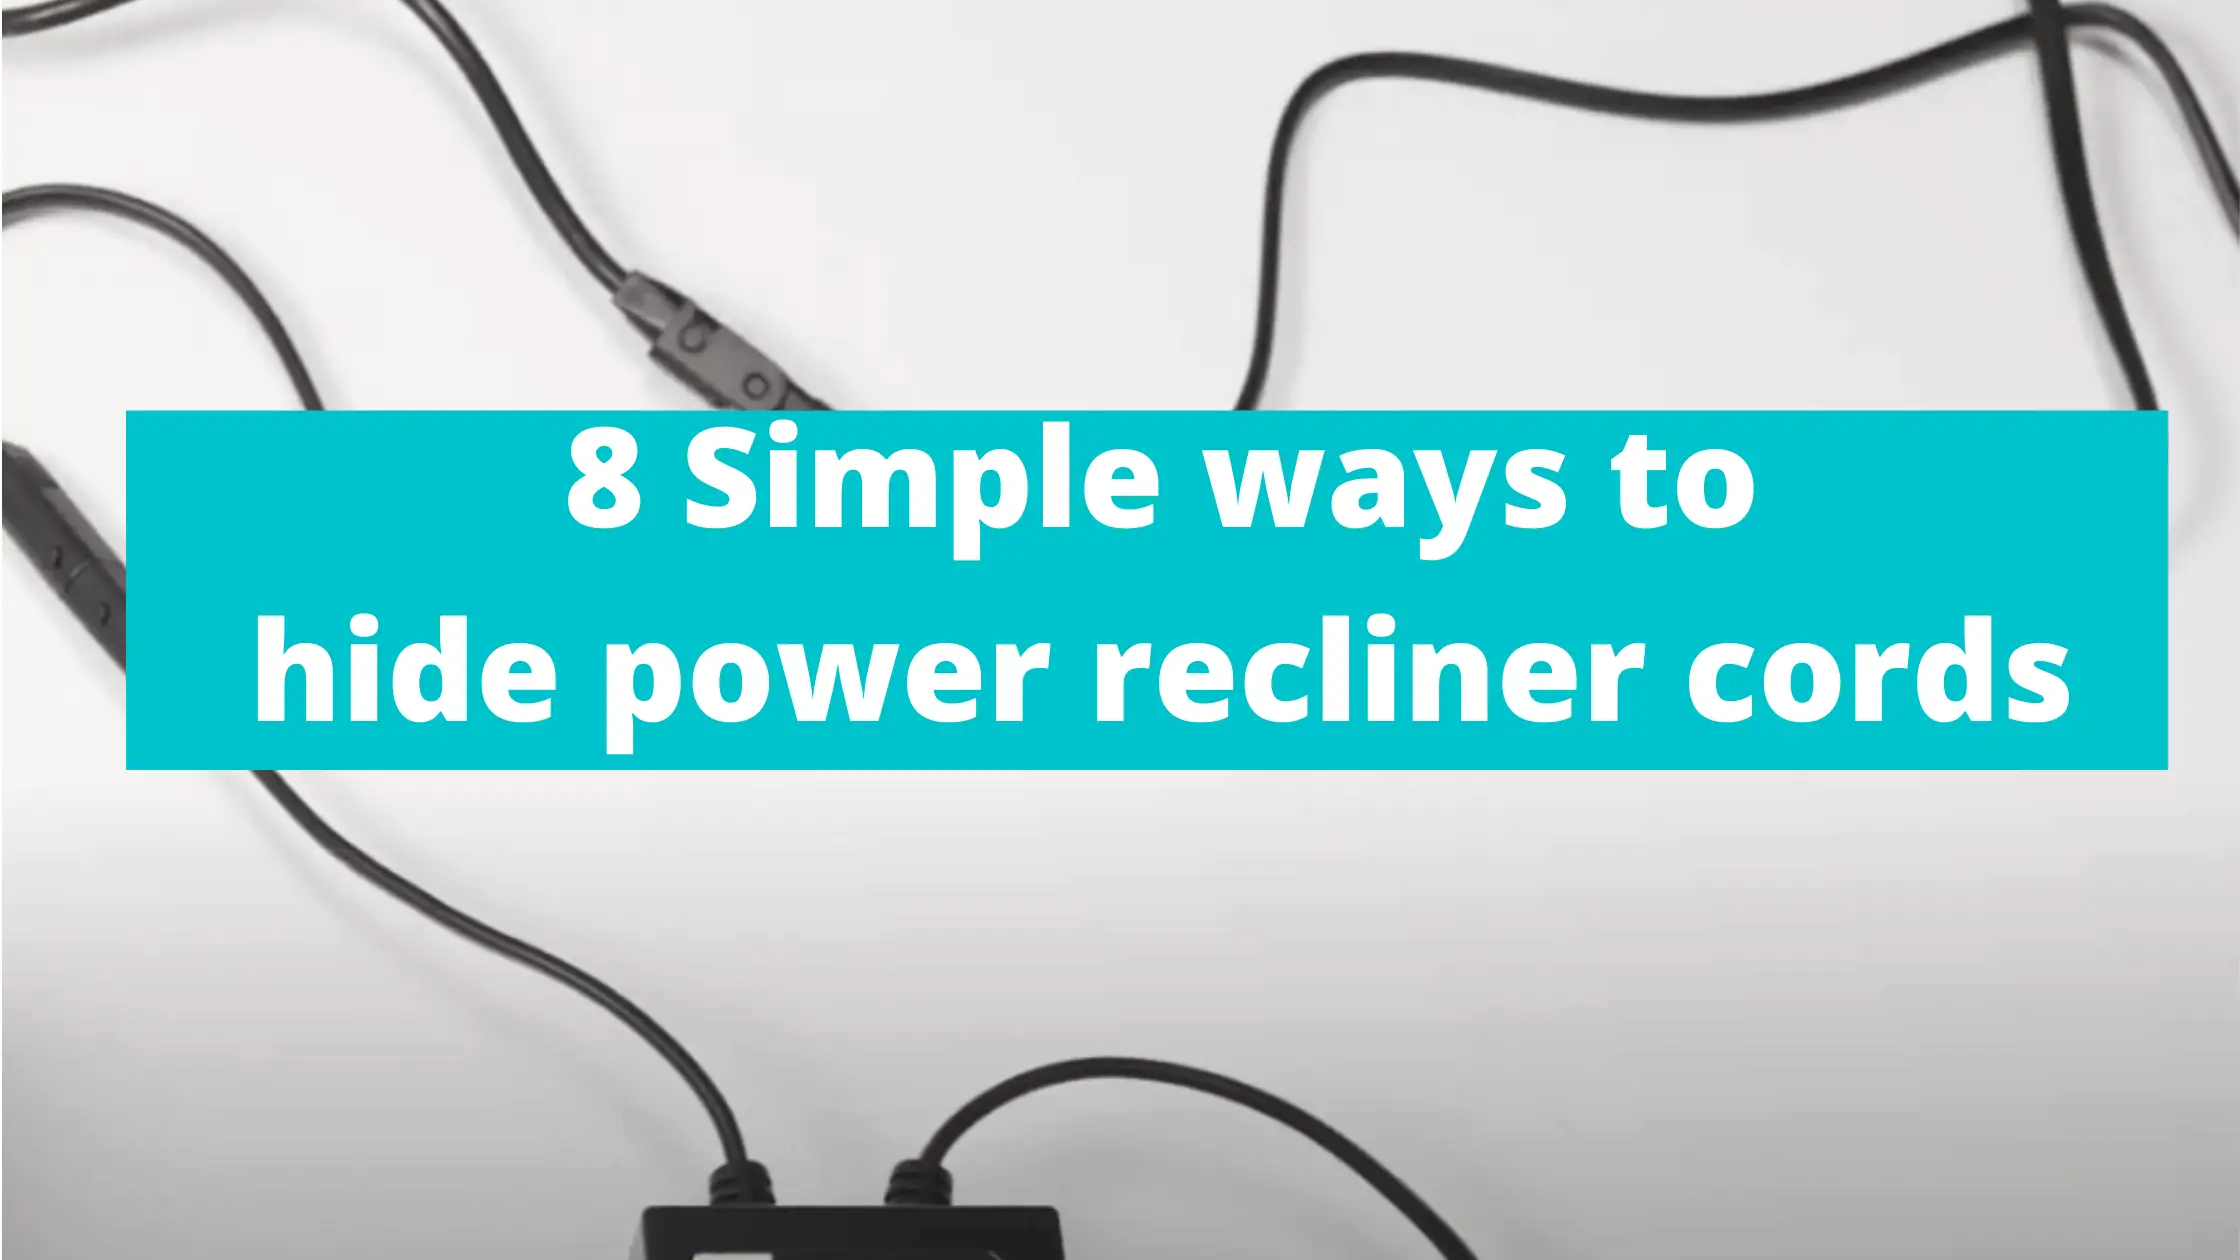 How to hide power recliner cords